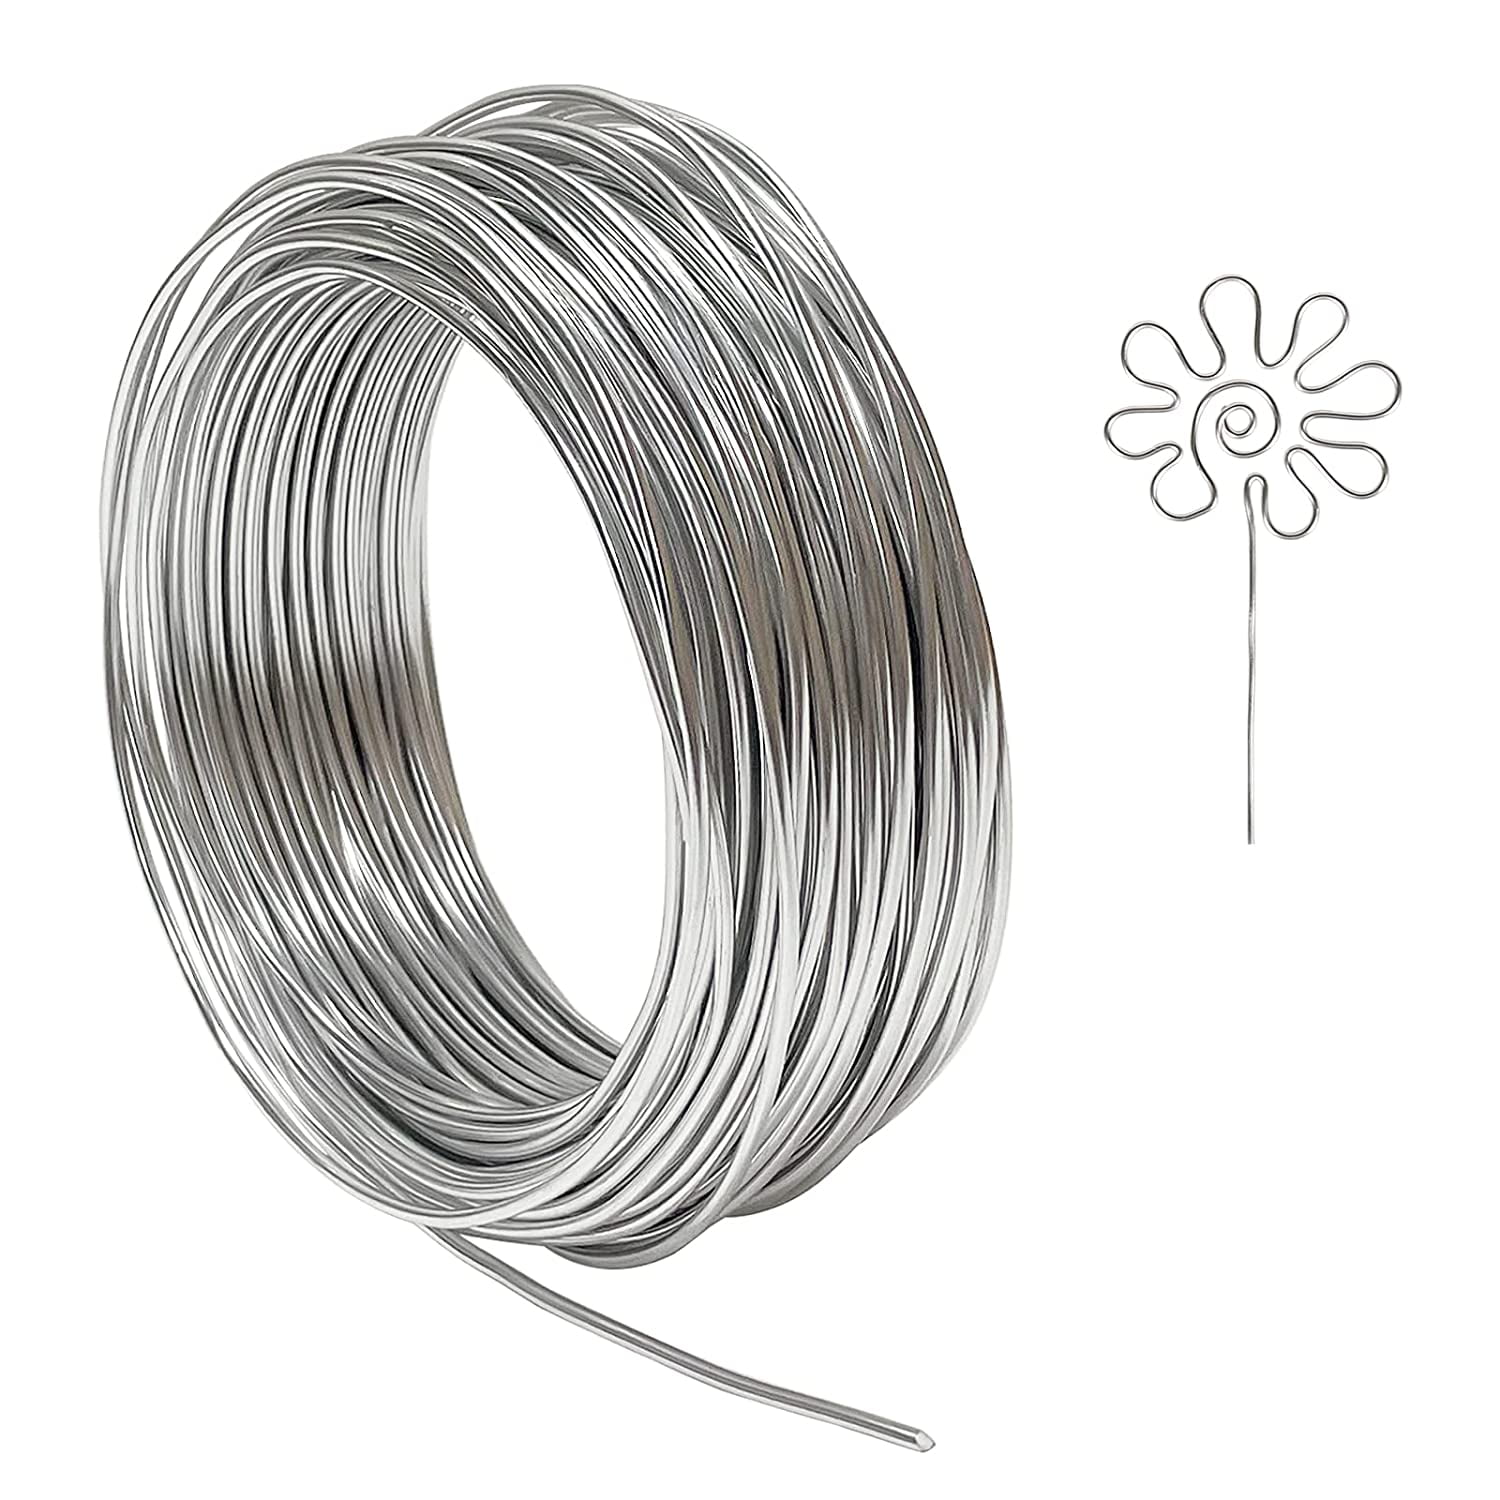 VILLCASE 1 Roll DIY Handmade Aluminum Wire DIY Aluminum Wire Armature Wire  Thin Wire Skeleton Wire Handcrafted Wire for Crafts DIY Jewelry Wire for